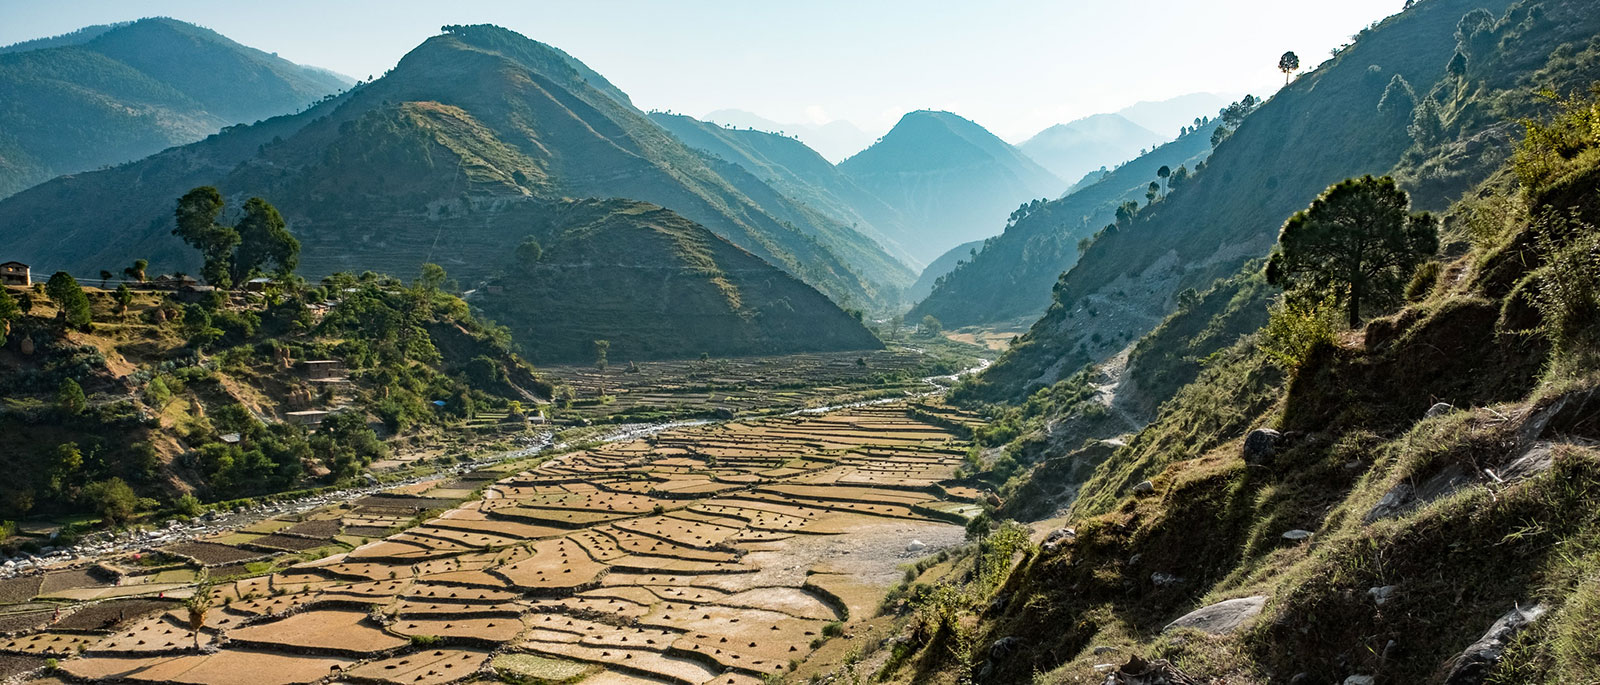 October 2017. Farm areas just outside Chainpur, Bajhang District, Nepal. Photograph by Jason Houston for USAID